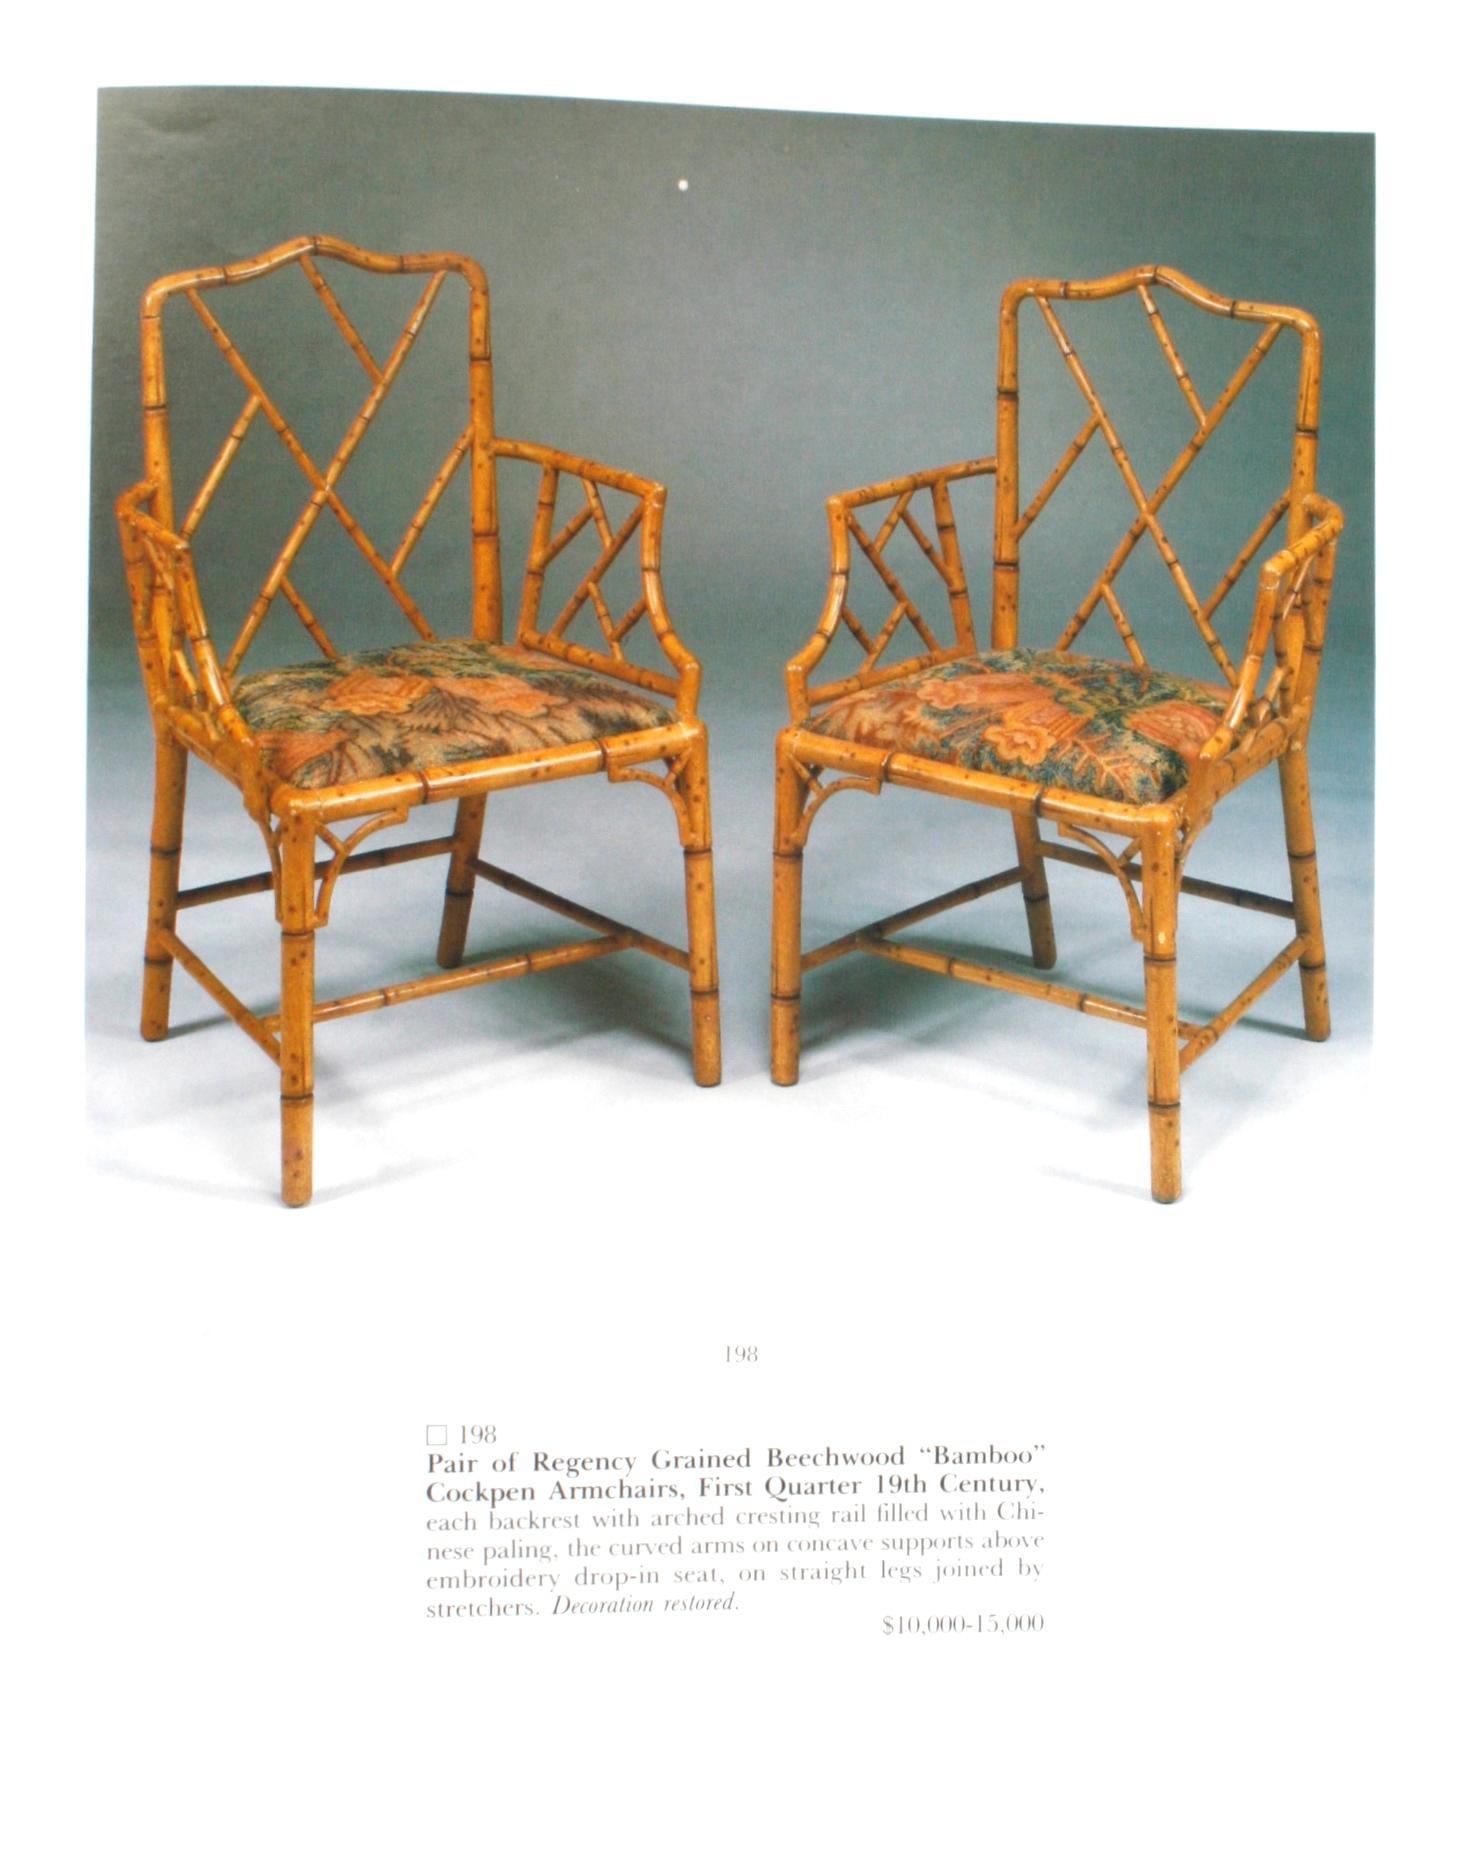 20th Century Sotheby's Fine English Furniture and Carpets